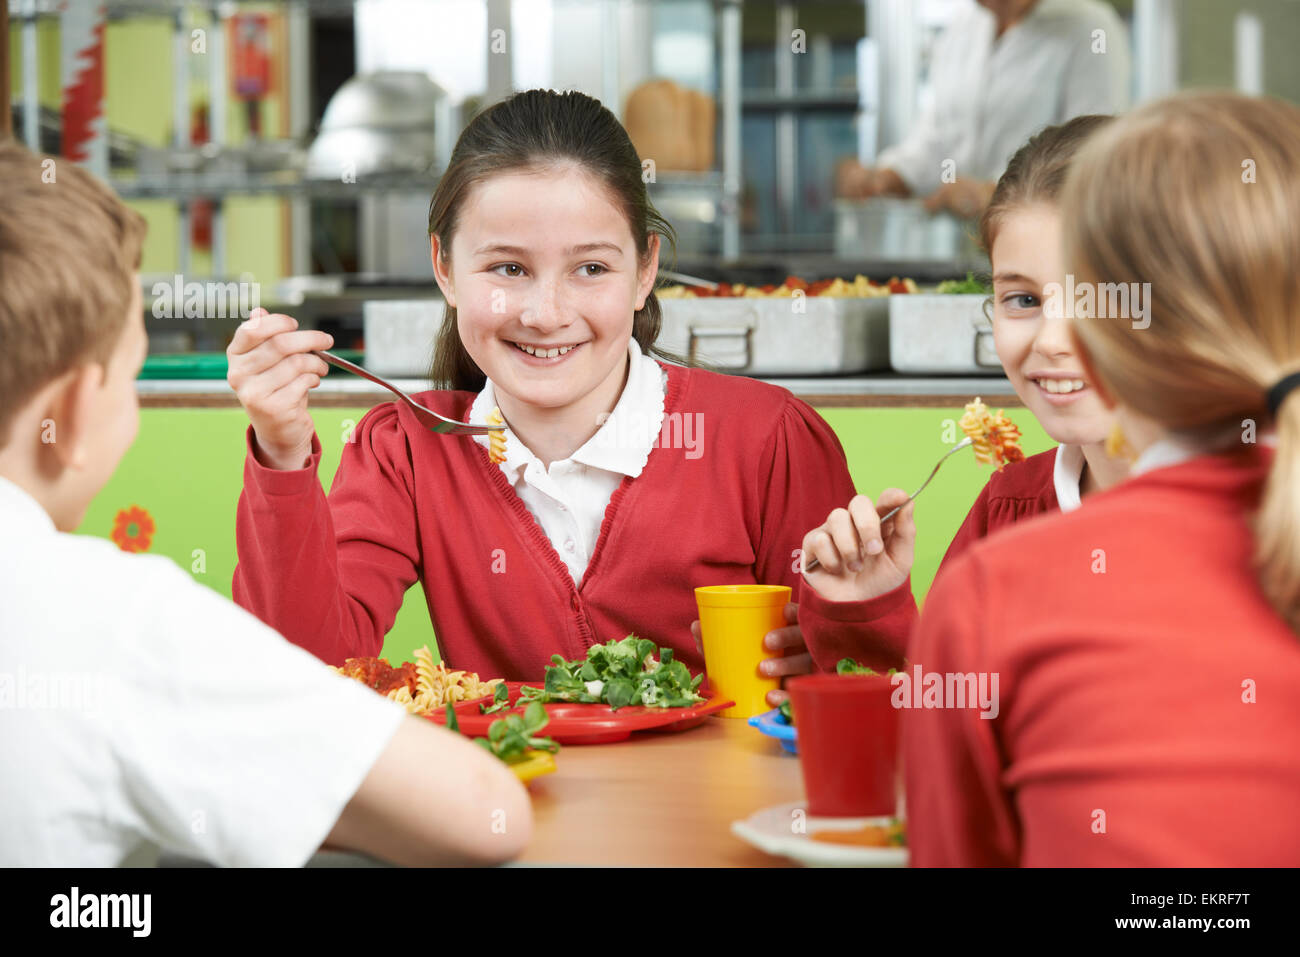 https://c8.alamy.com/comp/EKRF7T/group-of-pupils-sitting-at-table-in-school-cafeteria-eating-lunch-EKRF7T.jpg